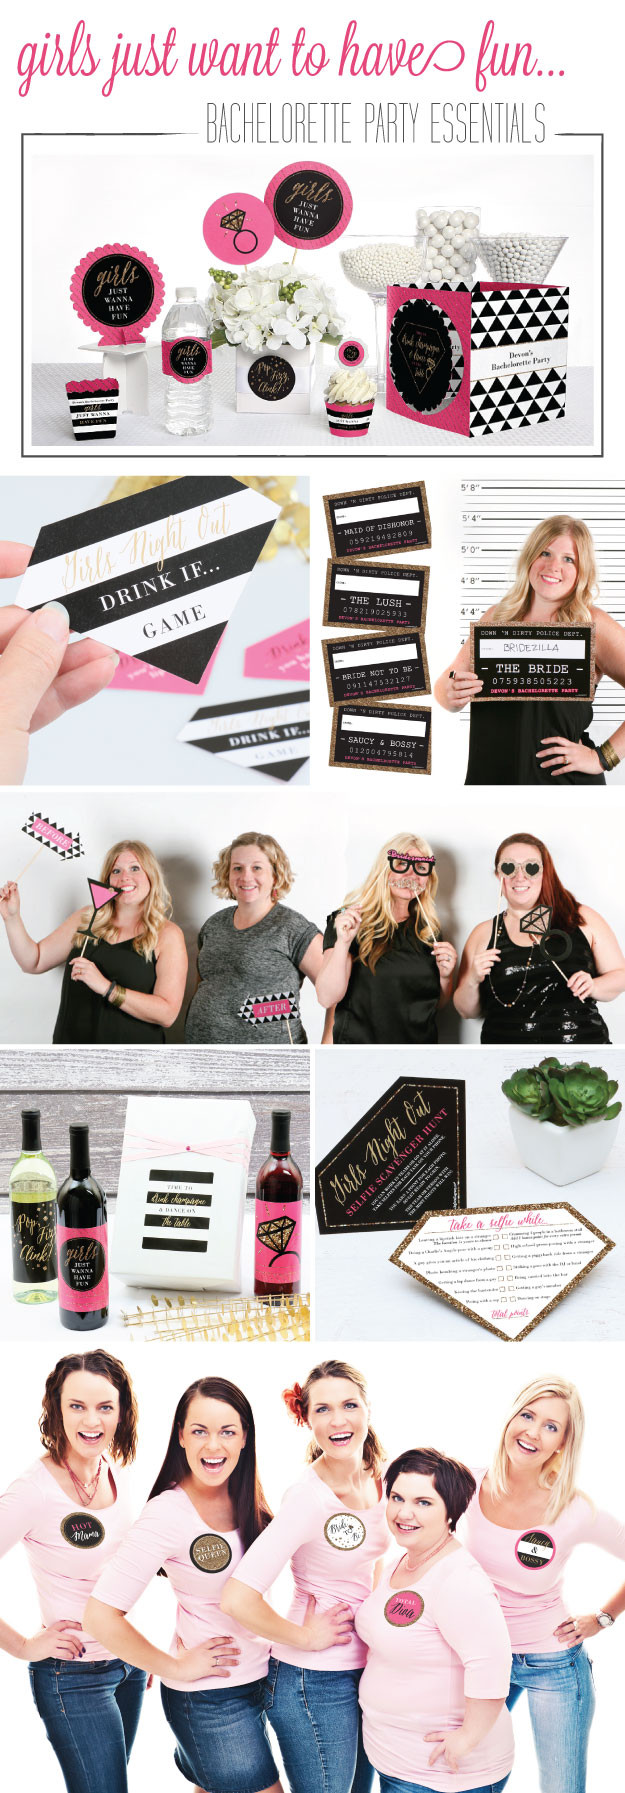 Bachelorette Party Ideas With Minors
 Girls Night Out Bachelorette Party Ideas